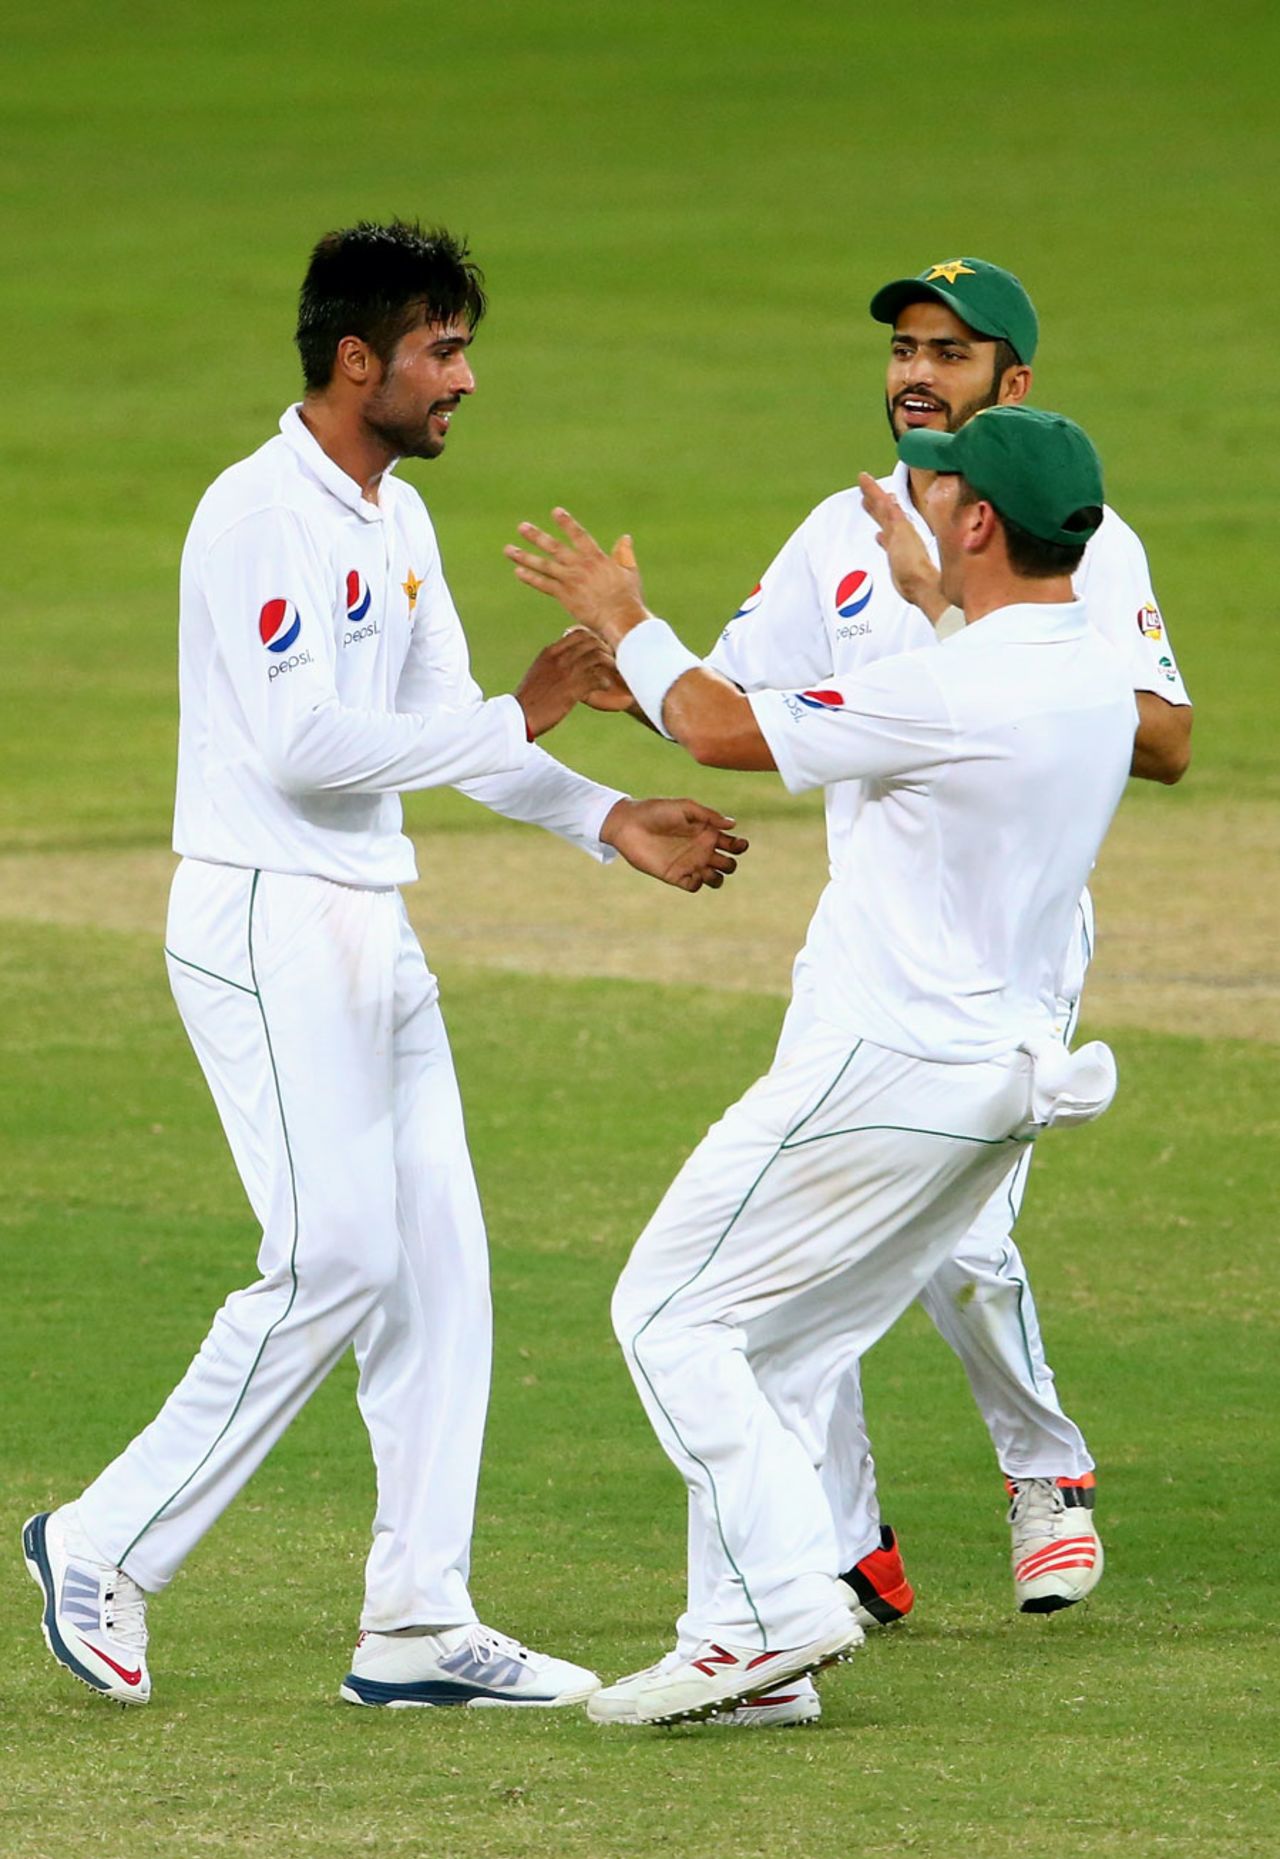 Mohammad Amir removed West Indies' openers, Pakistan v West Indies, 1st Test, Dubai, 4th day, October 16, 2016